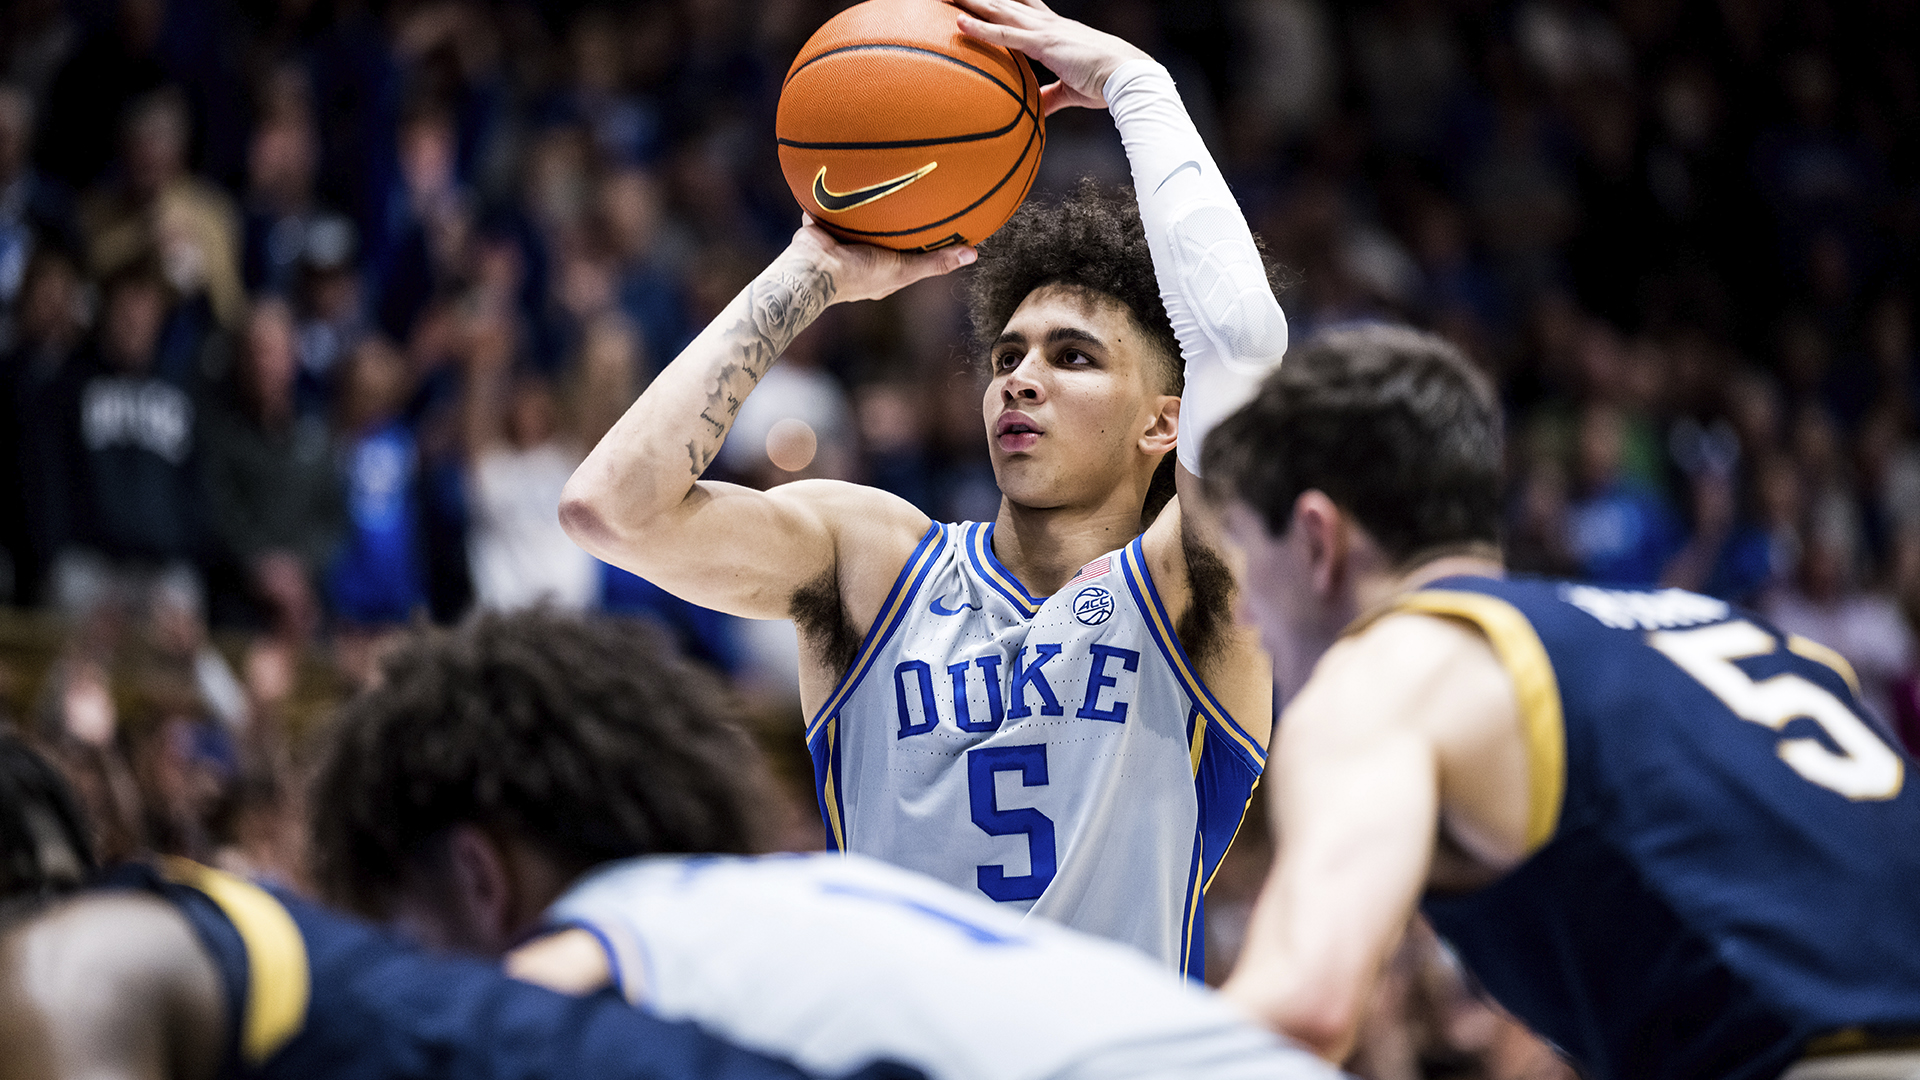 Can Tyrese Proctor’s Much Awaited Return Propel Duke Back in Top Form?